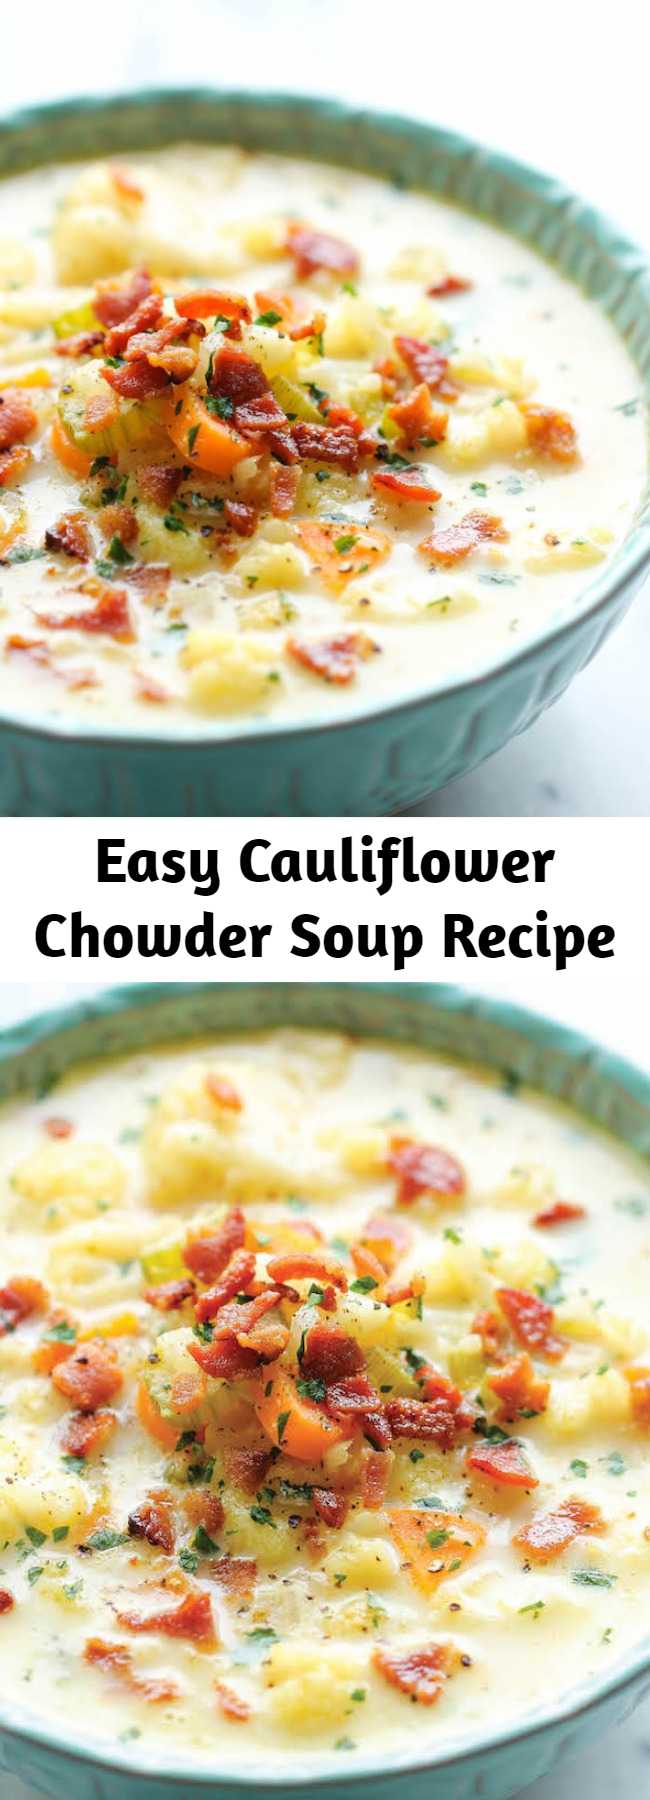 Easy Cauliflower Chowder Soup Recipe - A creamy, low carb, hearty and wonderfully cozy soup for those chilly nights!